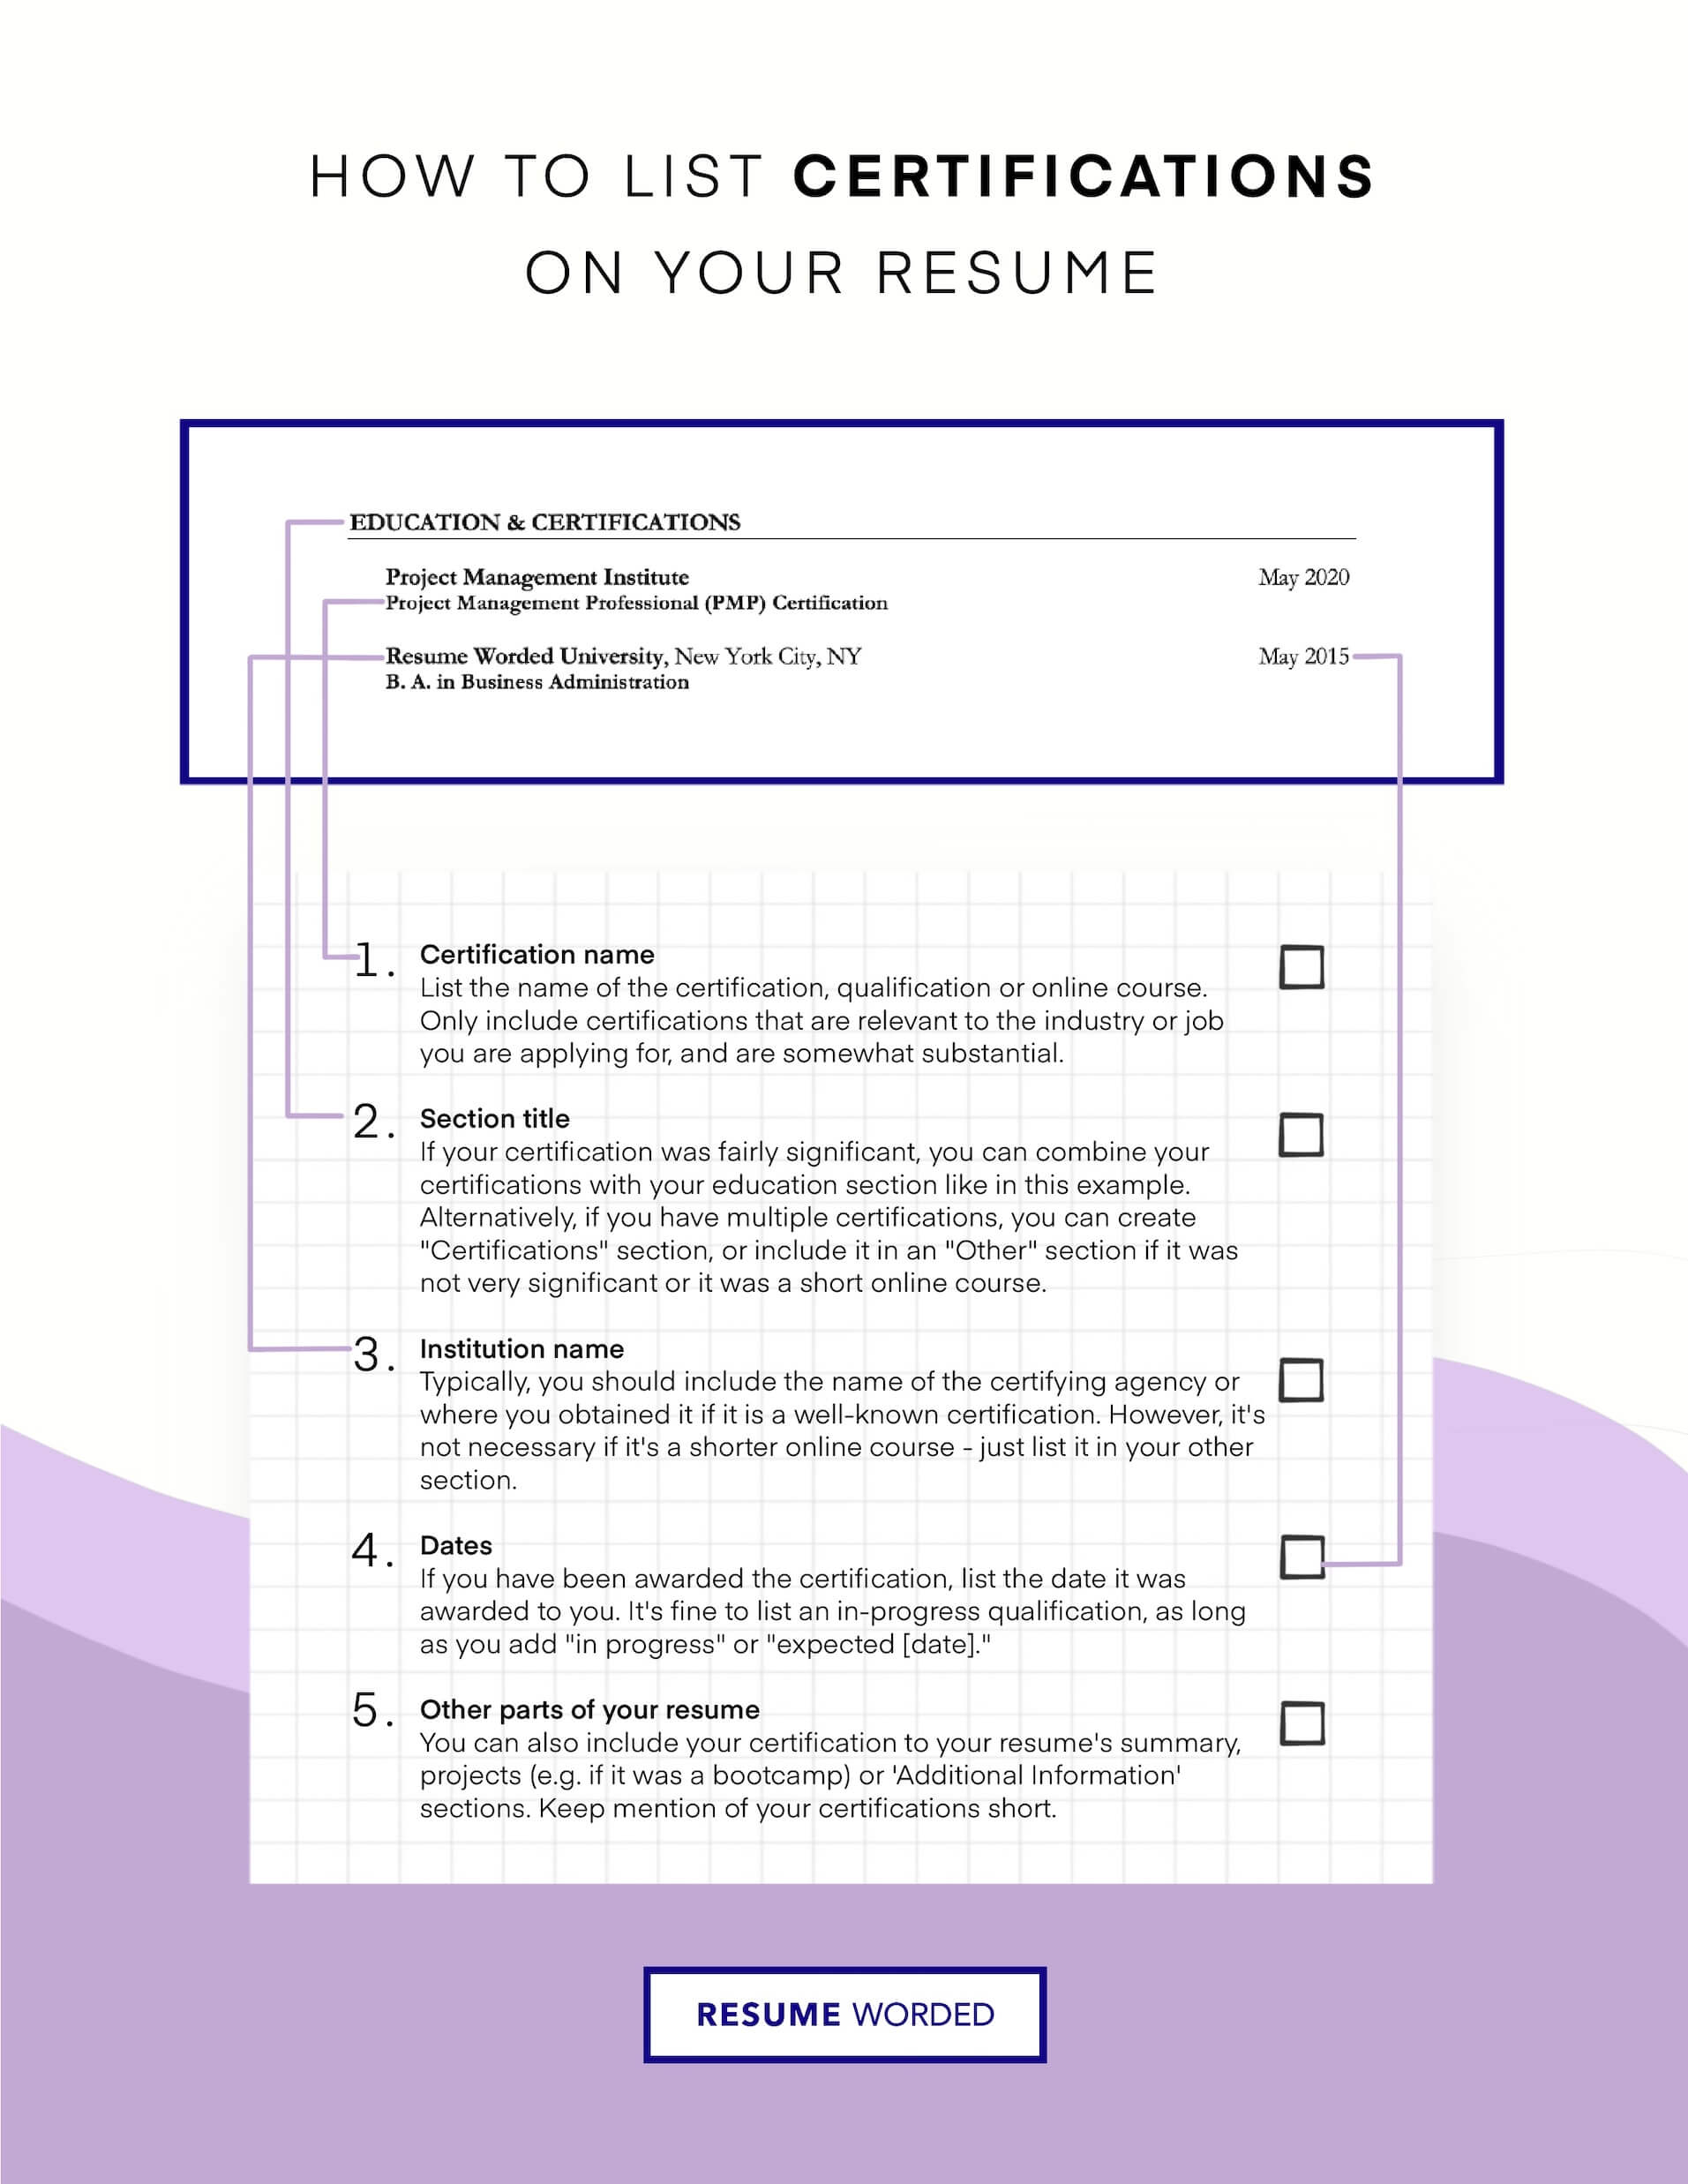 Bolster your entry level real estate agent resume with additional certifications - Entry Level Real Estate Agent  Resume